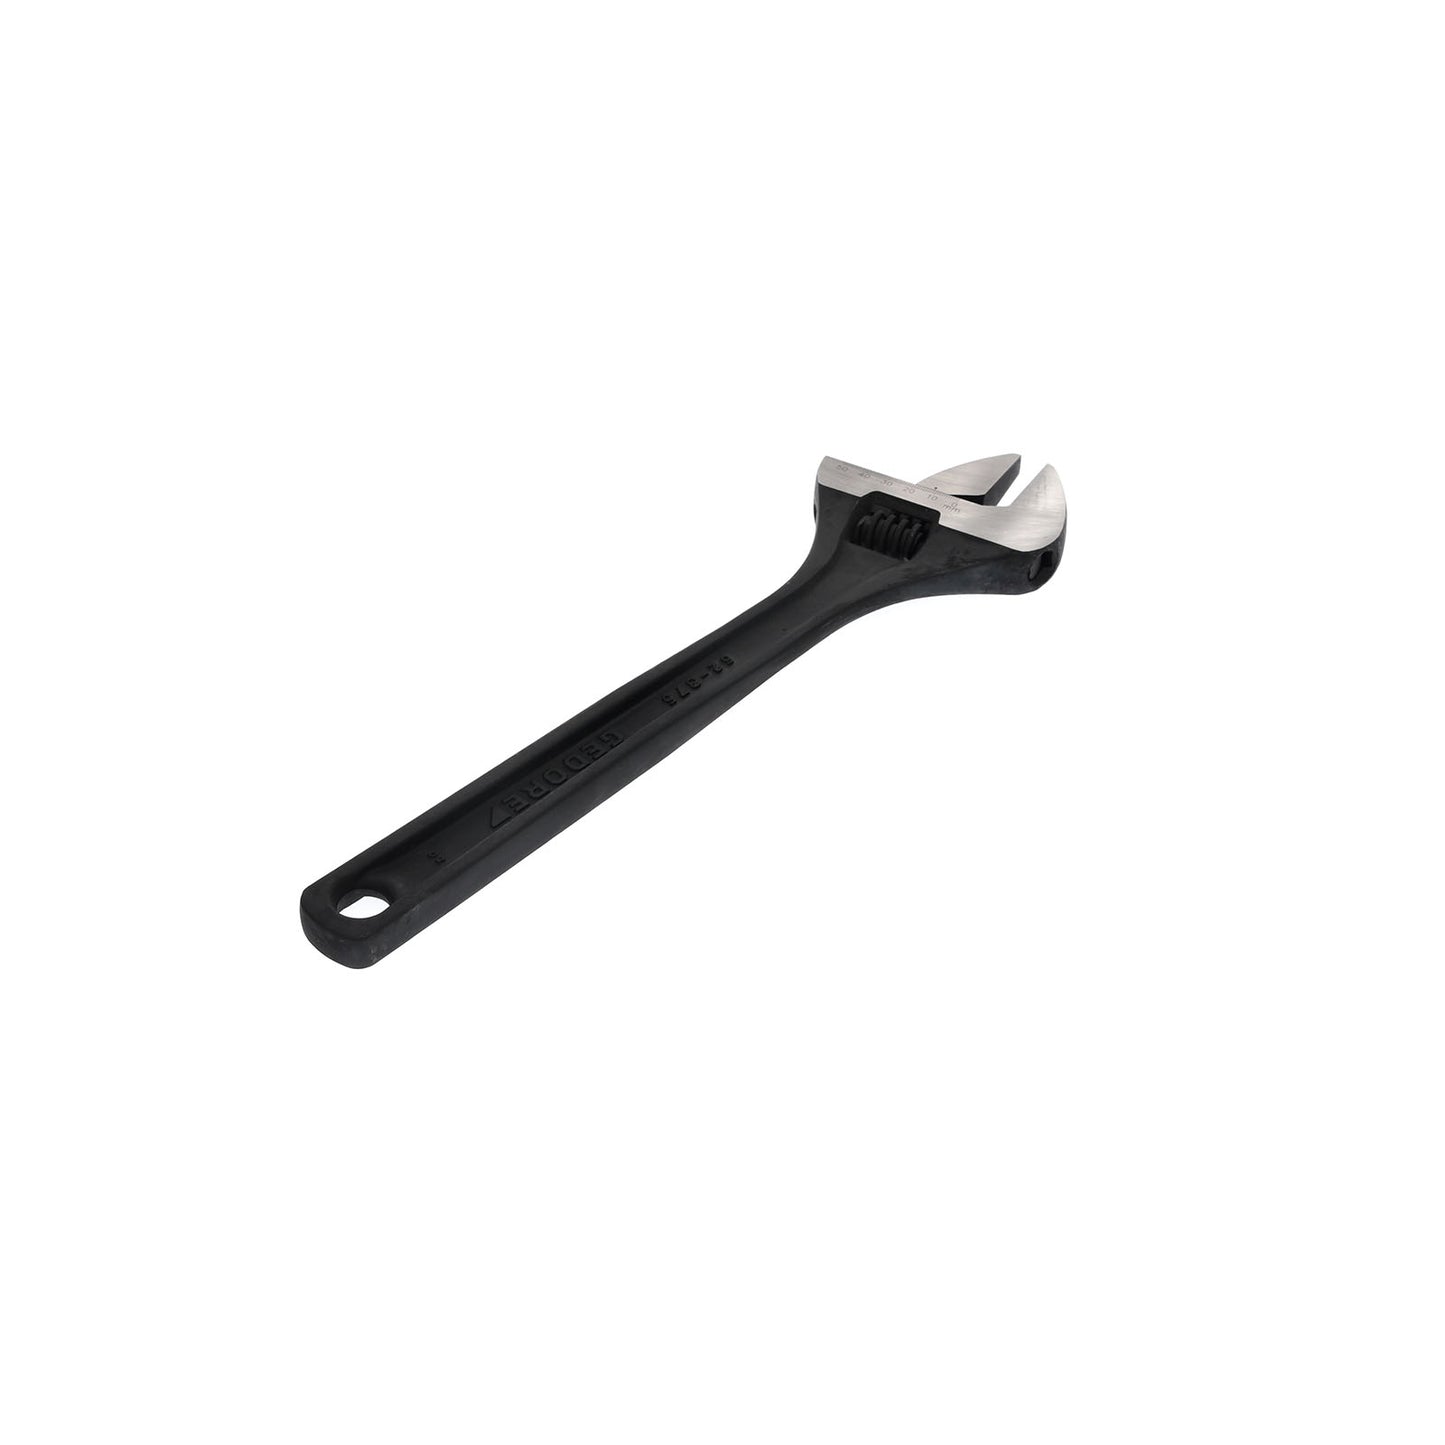 GEDORE 62 P 15 - Phosphated Adjustable Wrench, 15" (6368430)